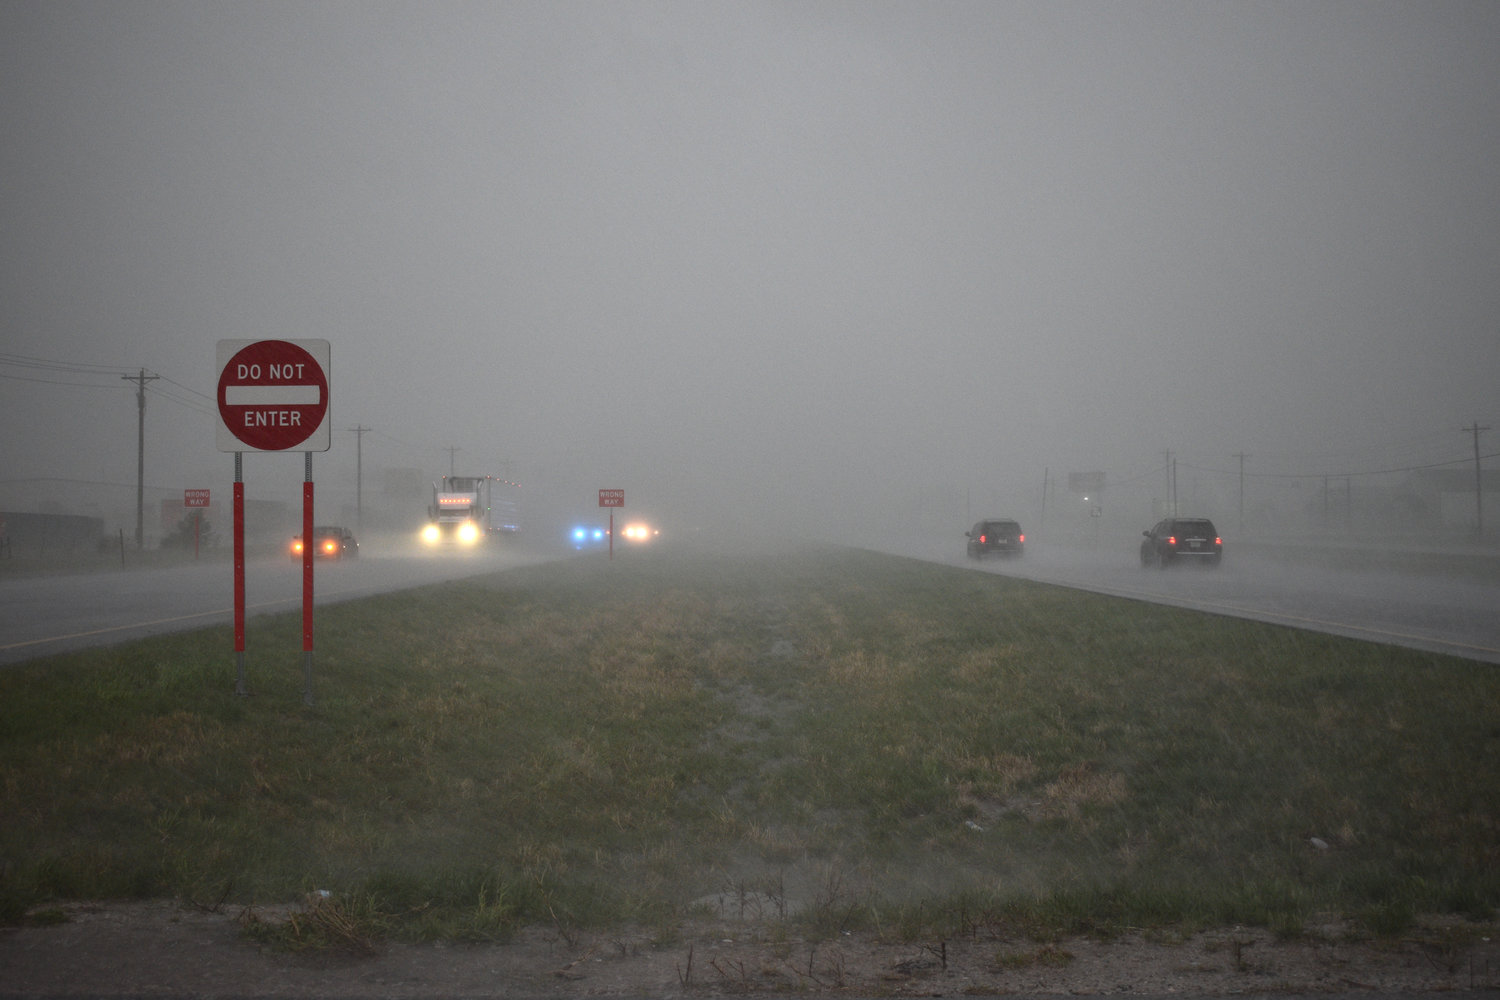 Looking north on Mo. 13, south of Bolivar, there appears to be a thick fog as significant hail drops from the sky.